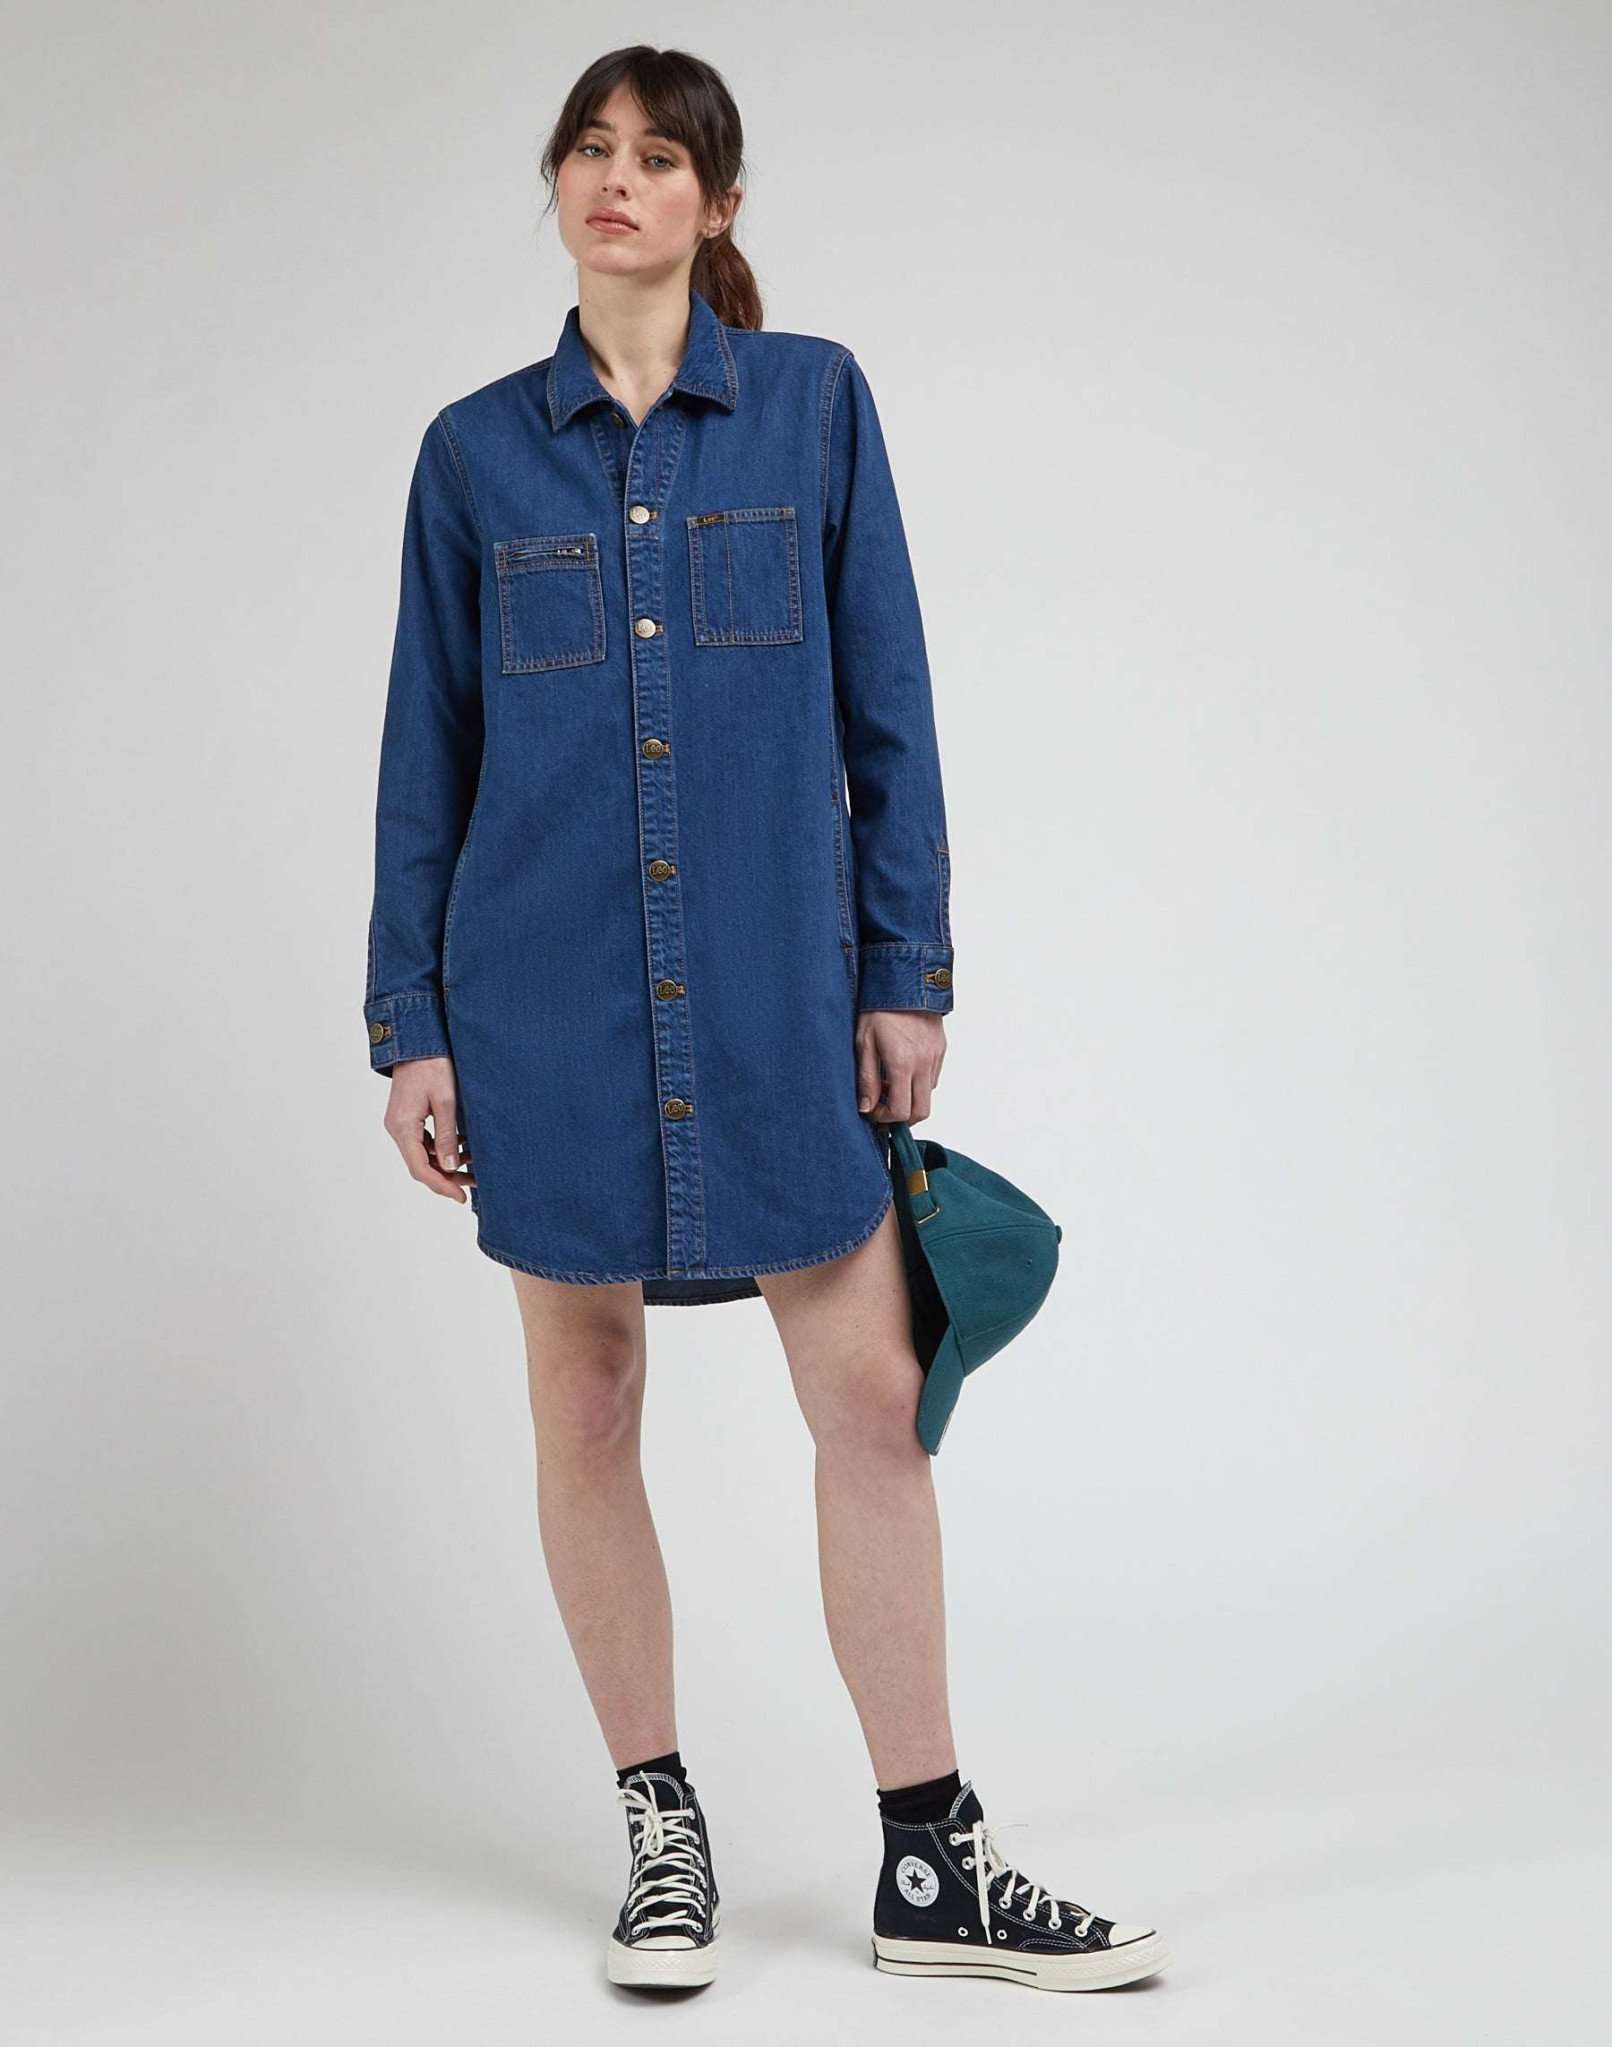 Unionall Shirt Dress in Into The Moon Kleider Lee   